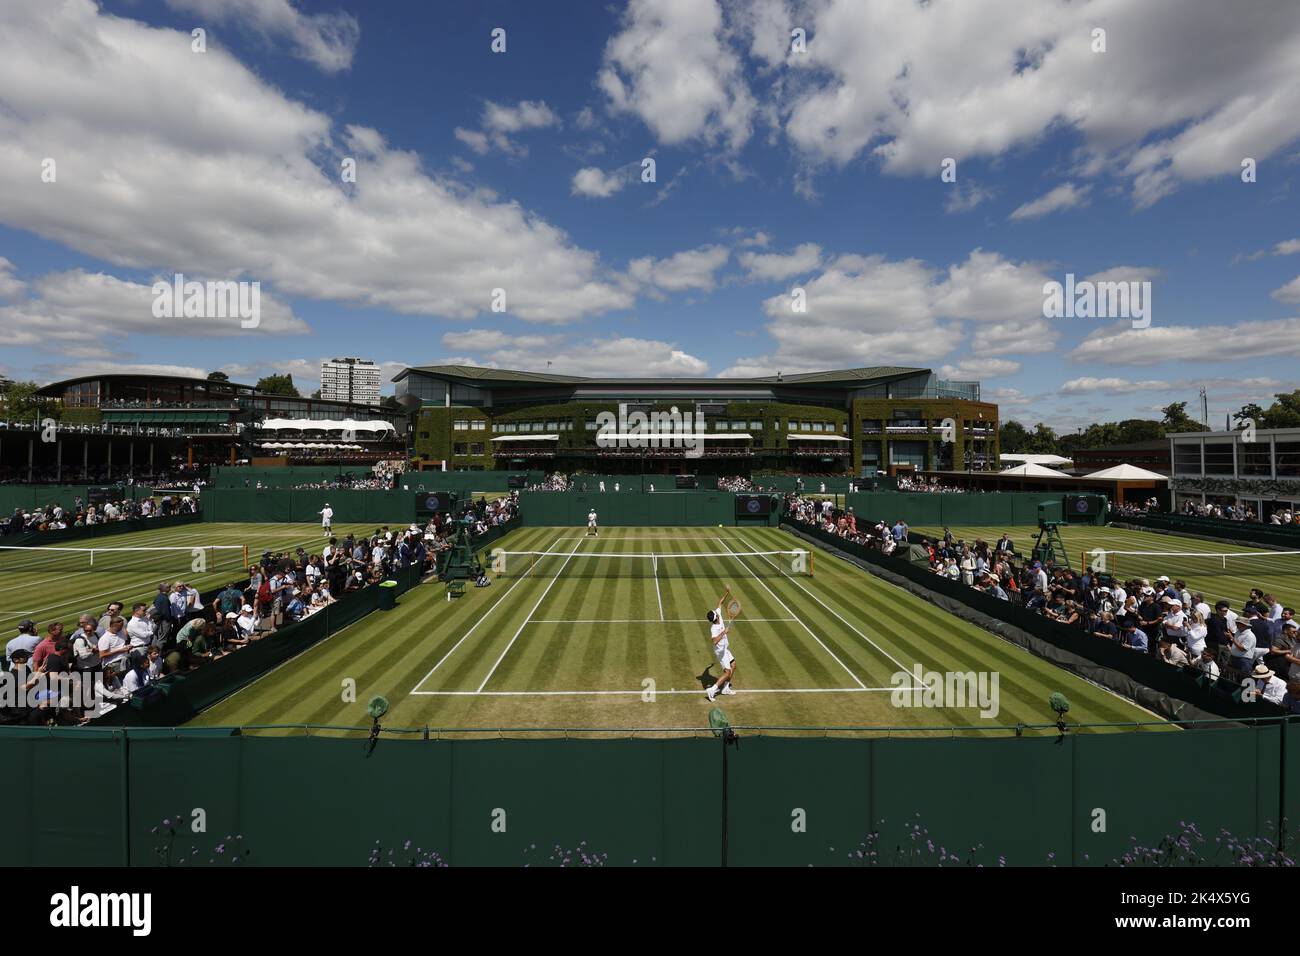 Panoramic view of outside courts with Centre Court building in the background, 2022 Wimbledon Championships, London, England, United Kingdom Stock Photo